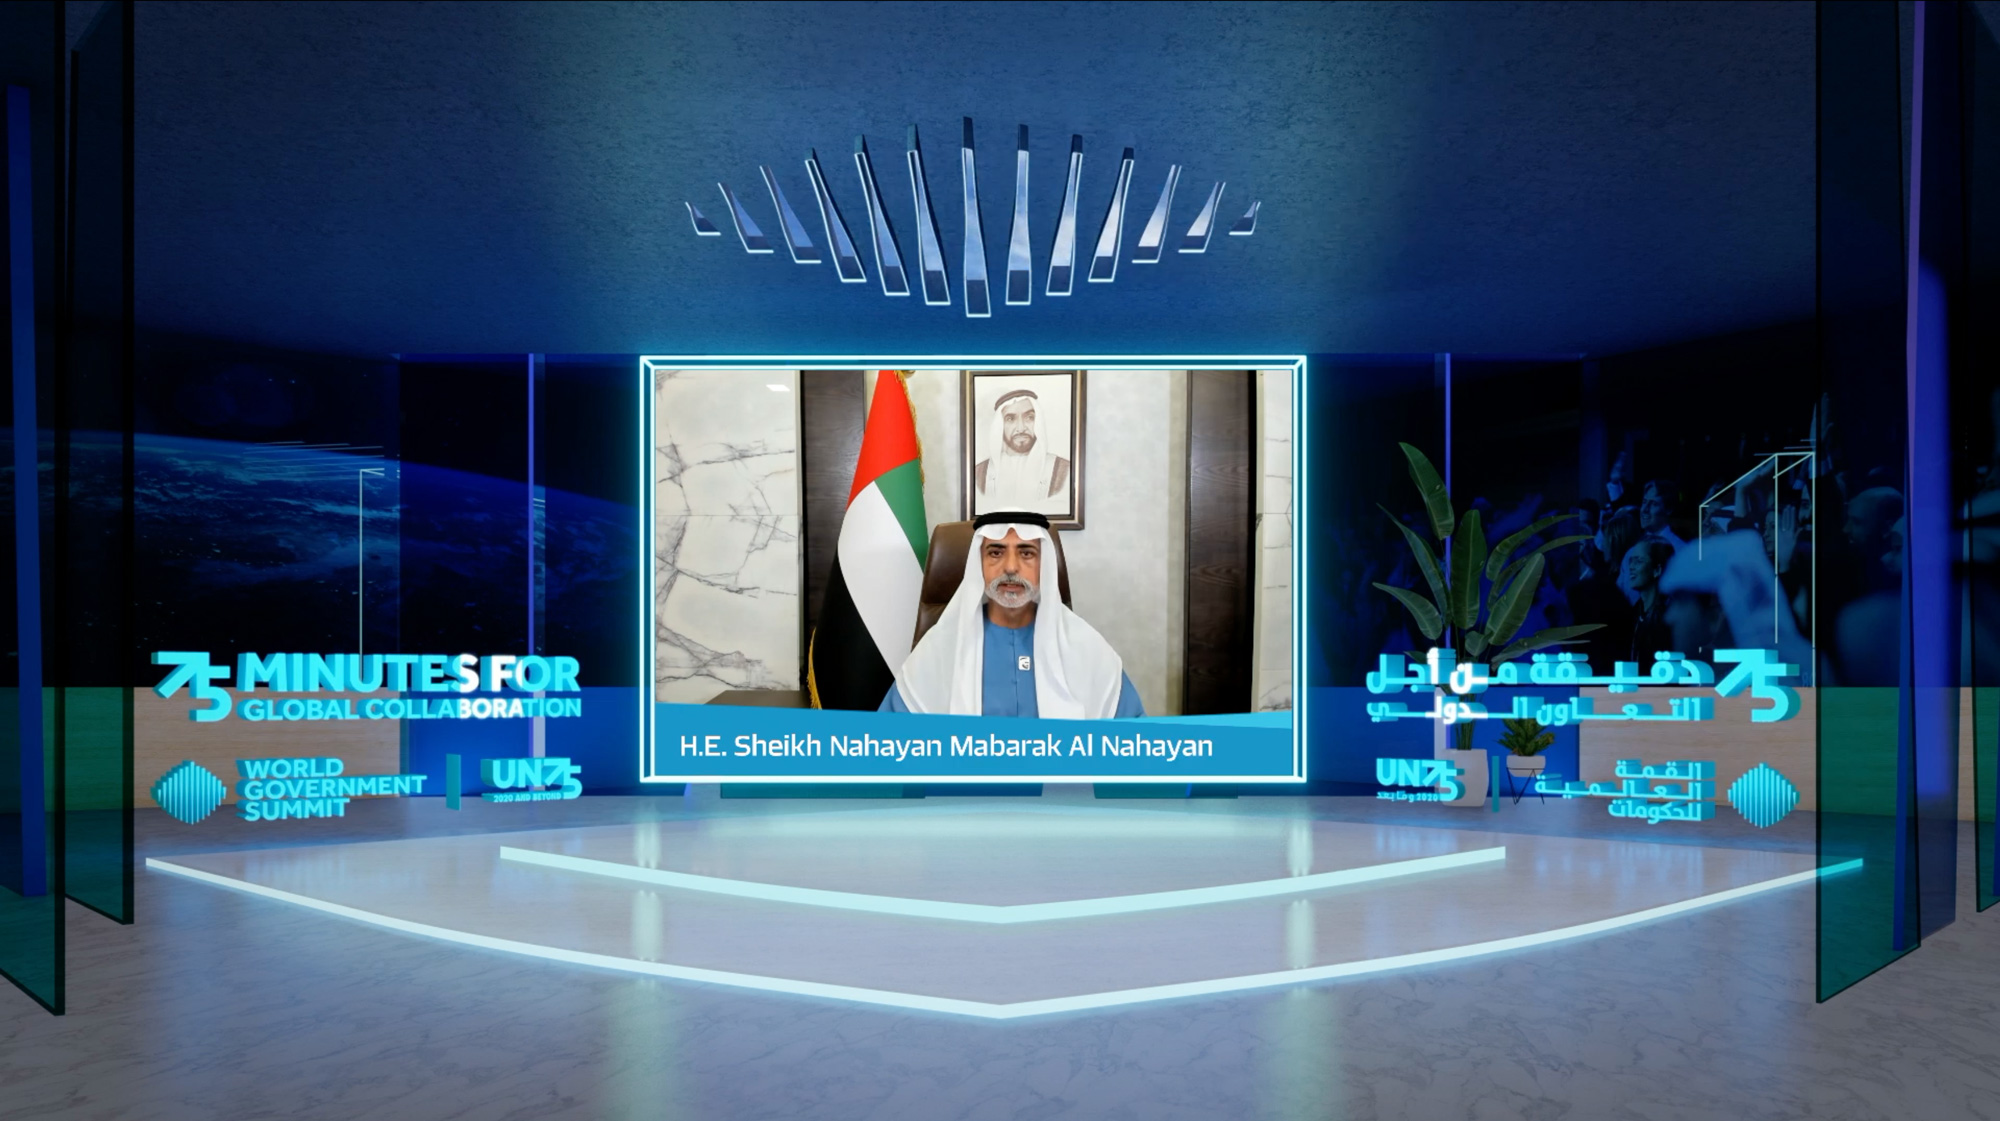 UAE is presenting message of peace to world, to work together for a better world: Nahyan bin Mubarak